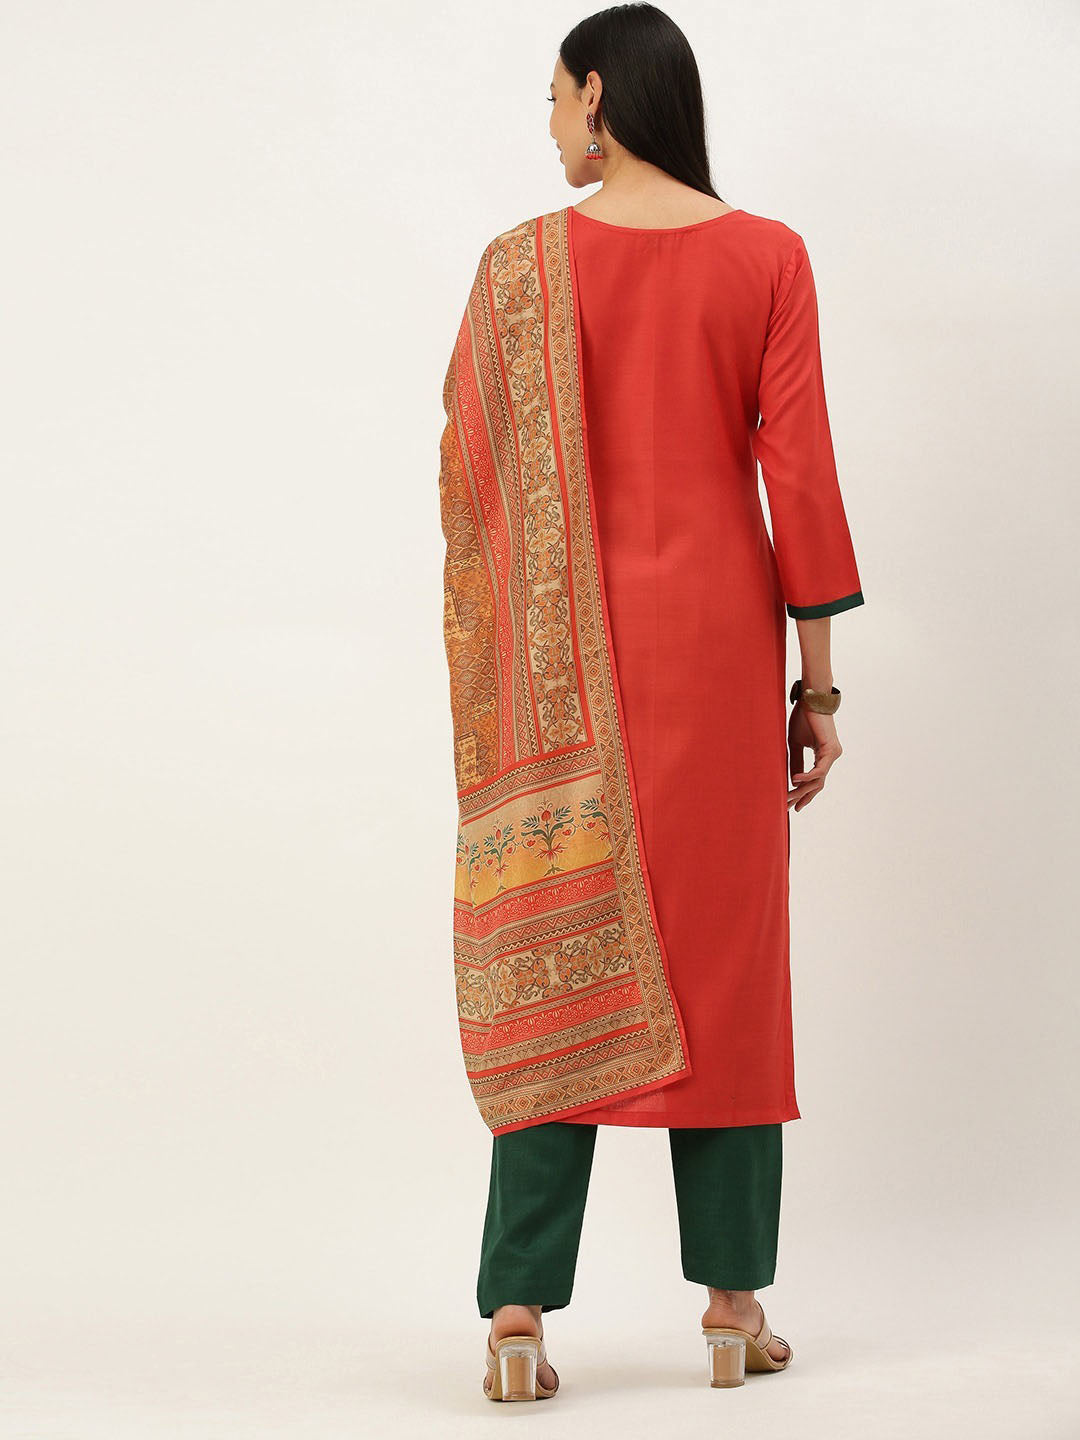 Red Unstitched Embroidered Cotton Salwar Suit Dress Material - Stilento